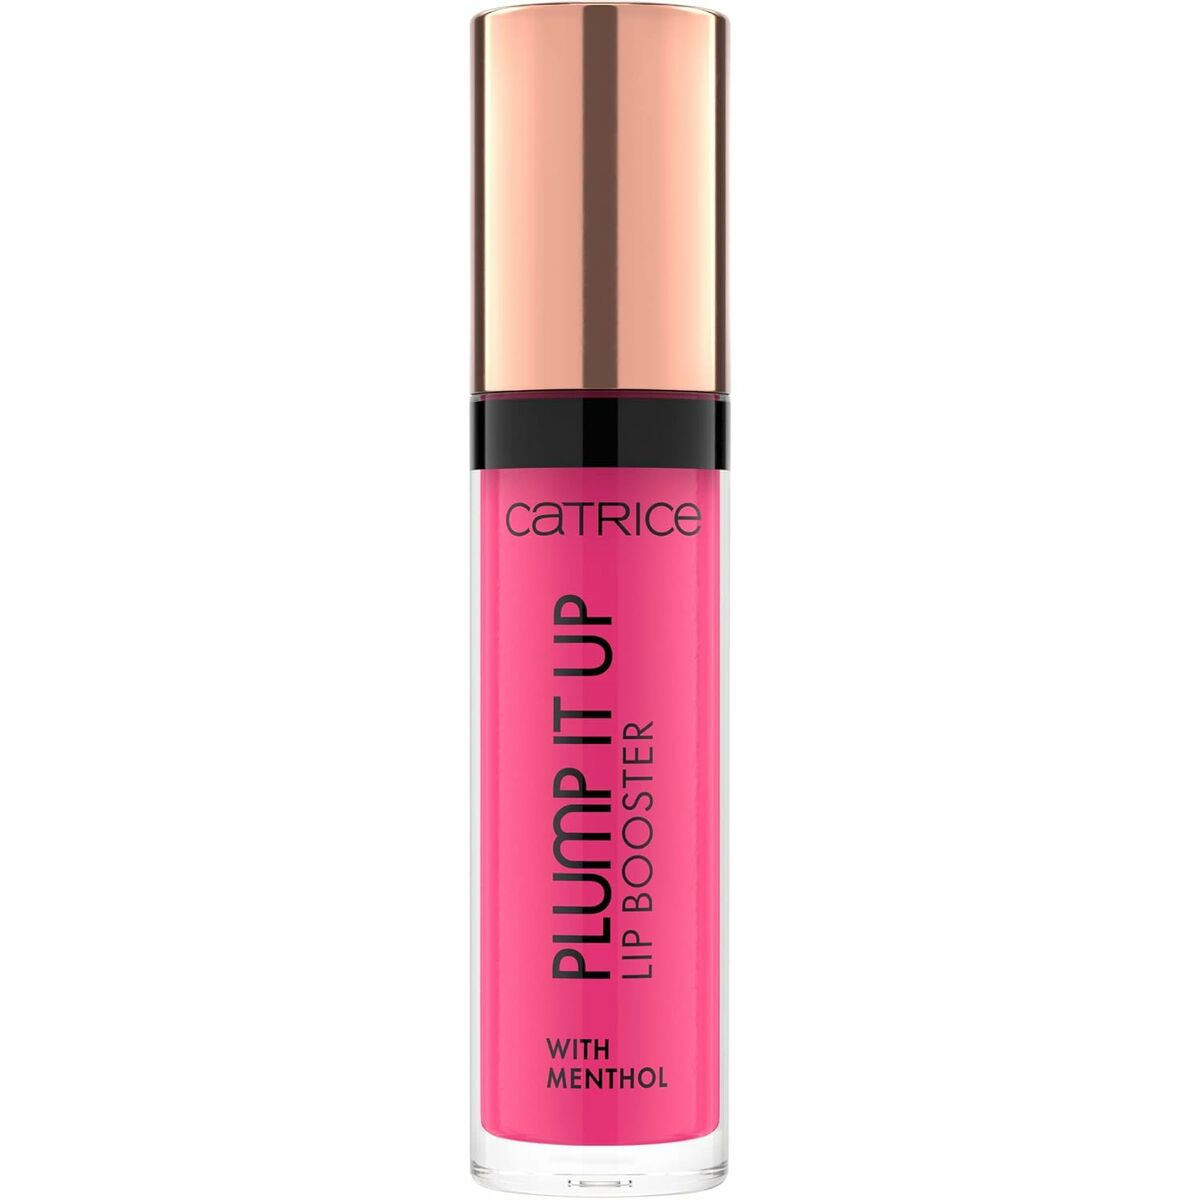 Lippgloss Catrice Plump It Up Nº 080 Overdosed on confidence 3,5 ml - CA International  